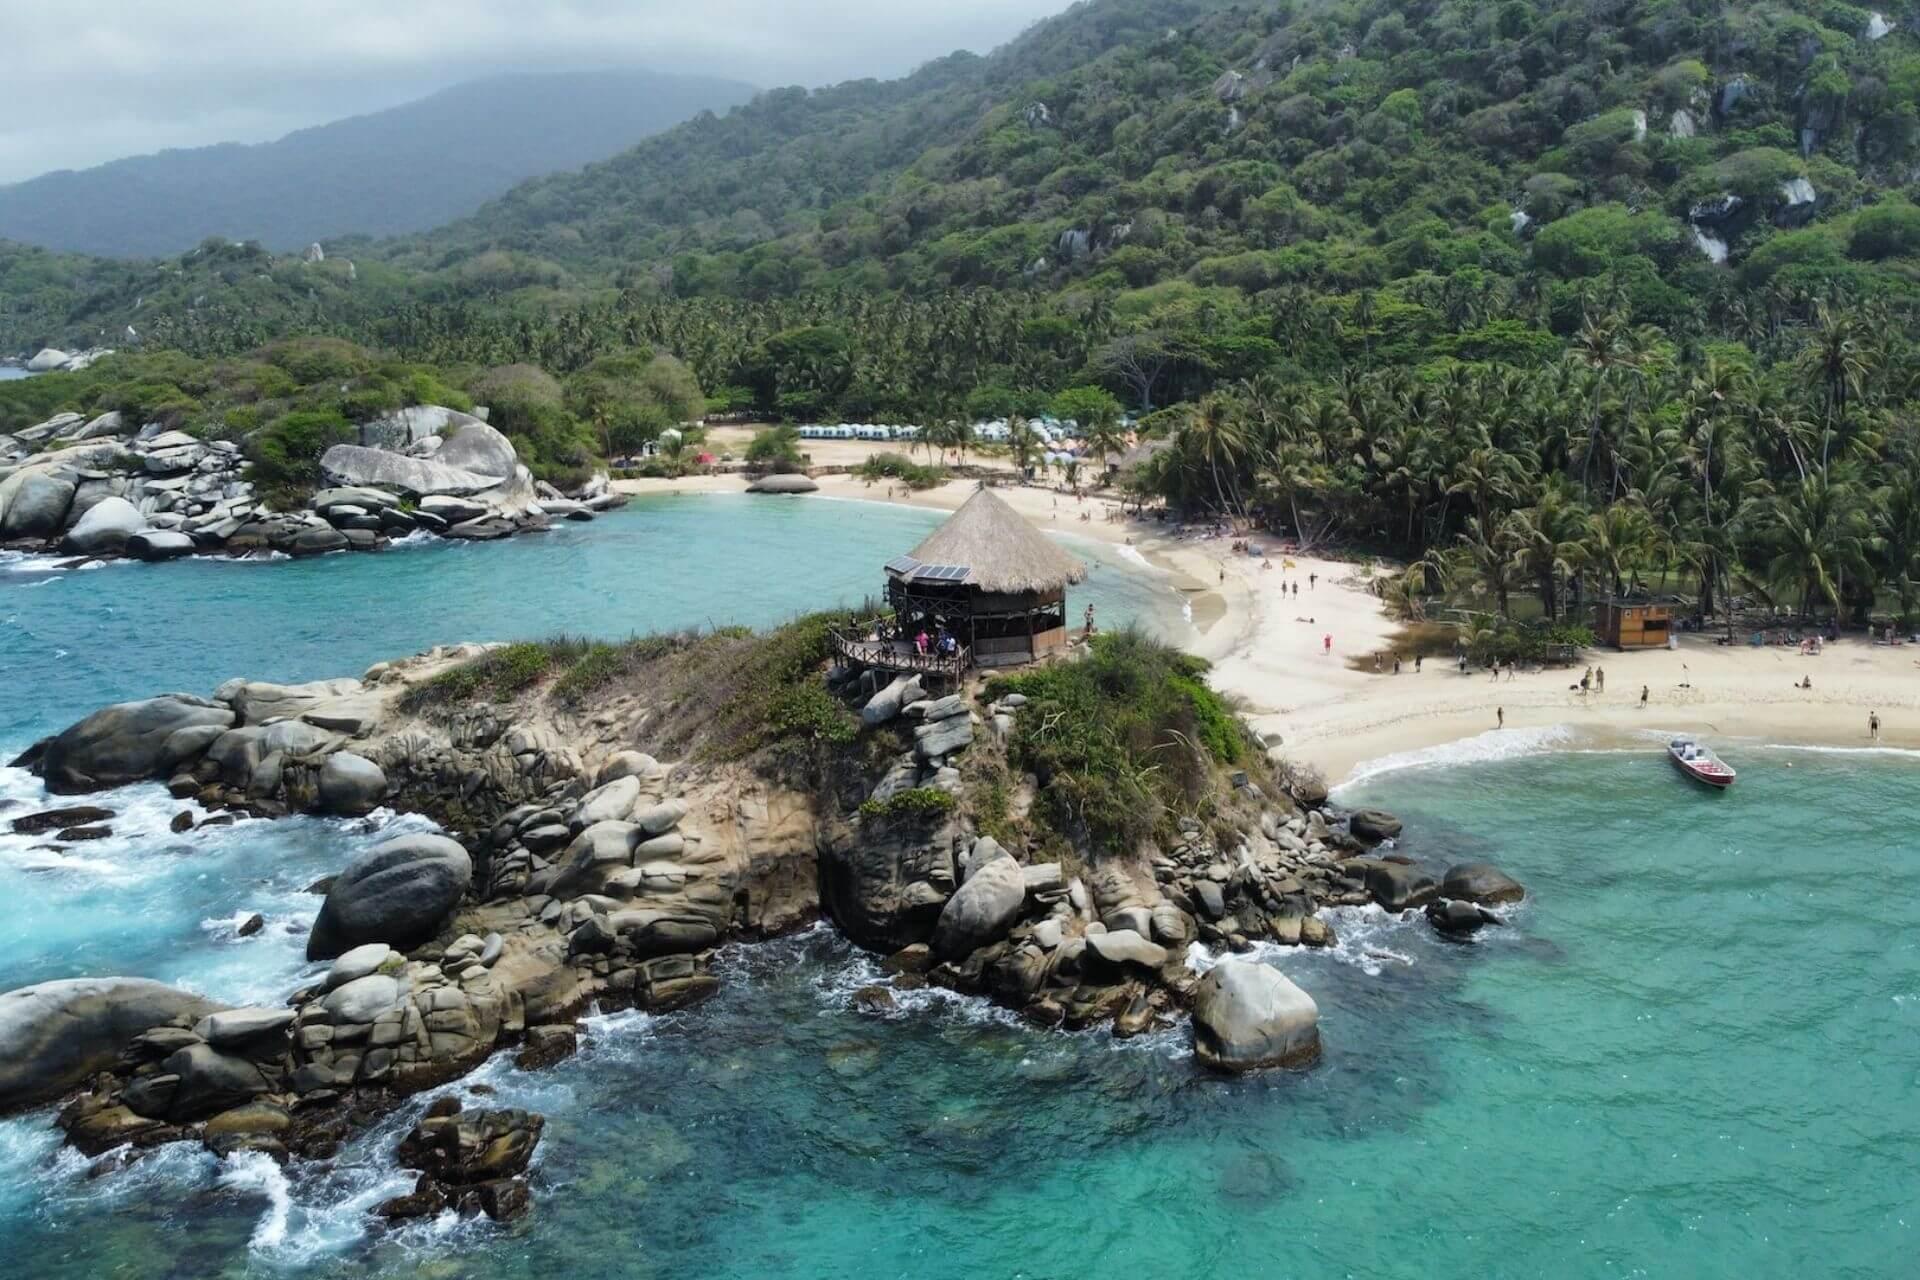 View of the Tayrona National Parksurrounded by sea in Colombia